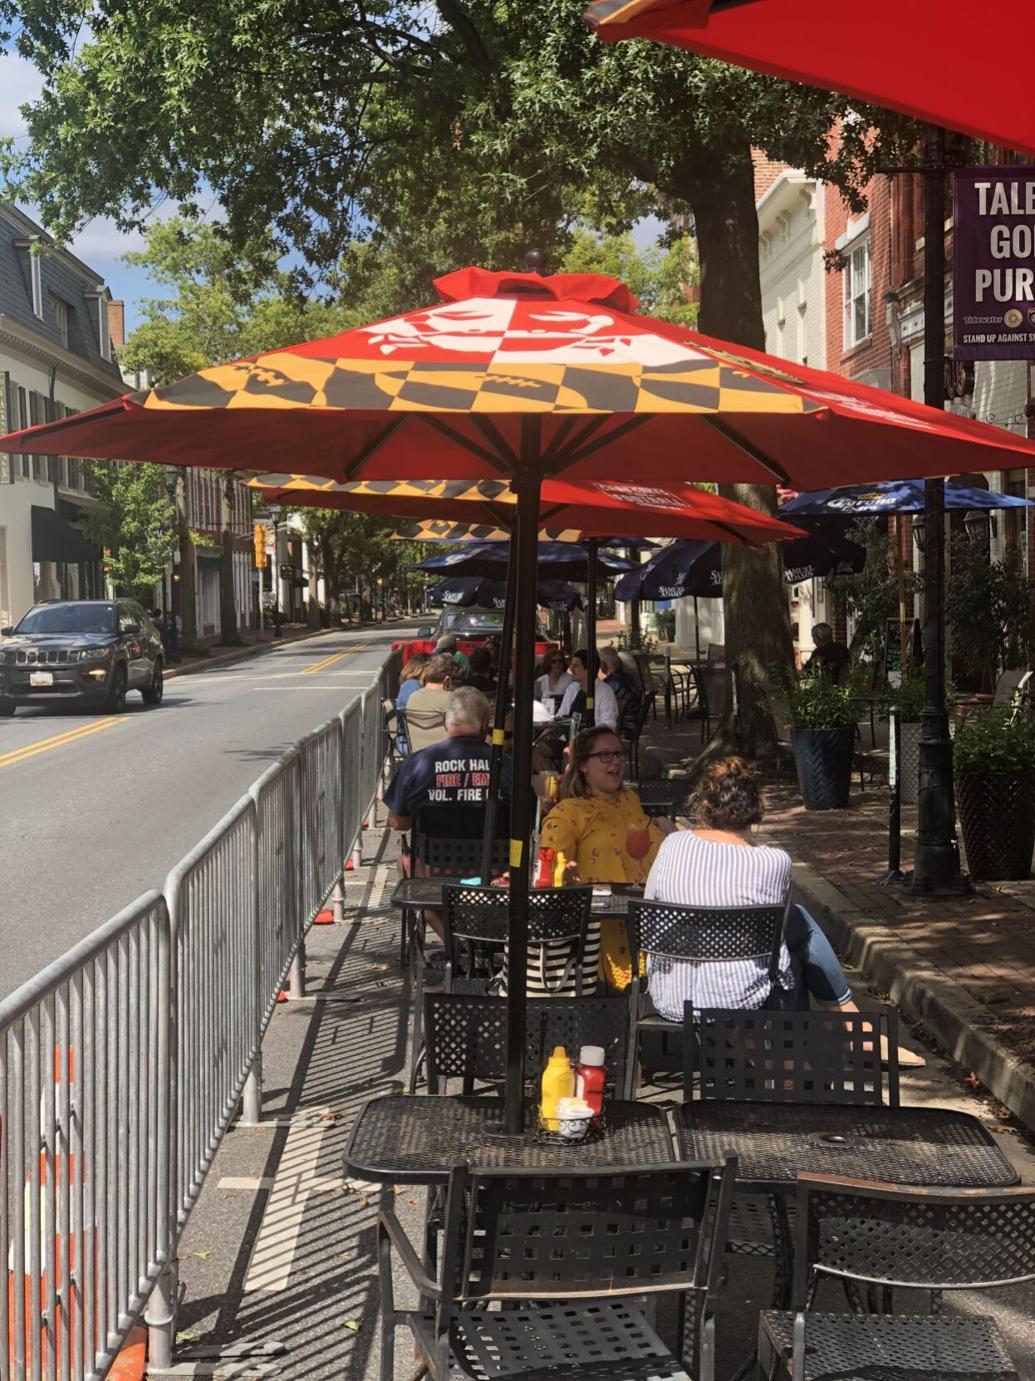 Easton Council to get update on downtown restaurants, sidewalk dining